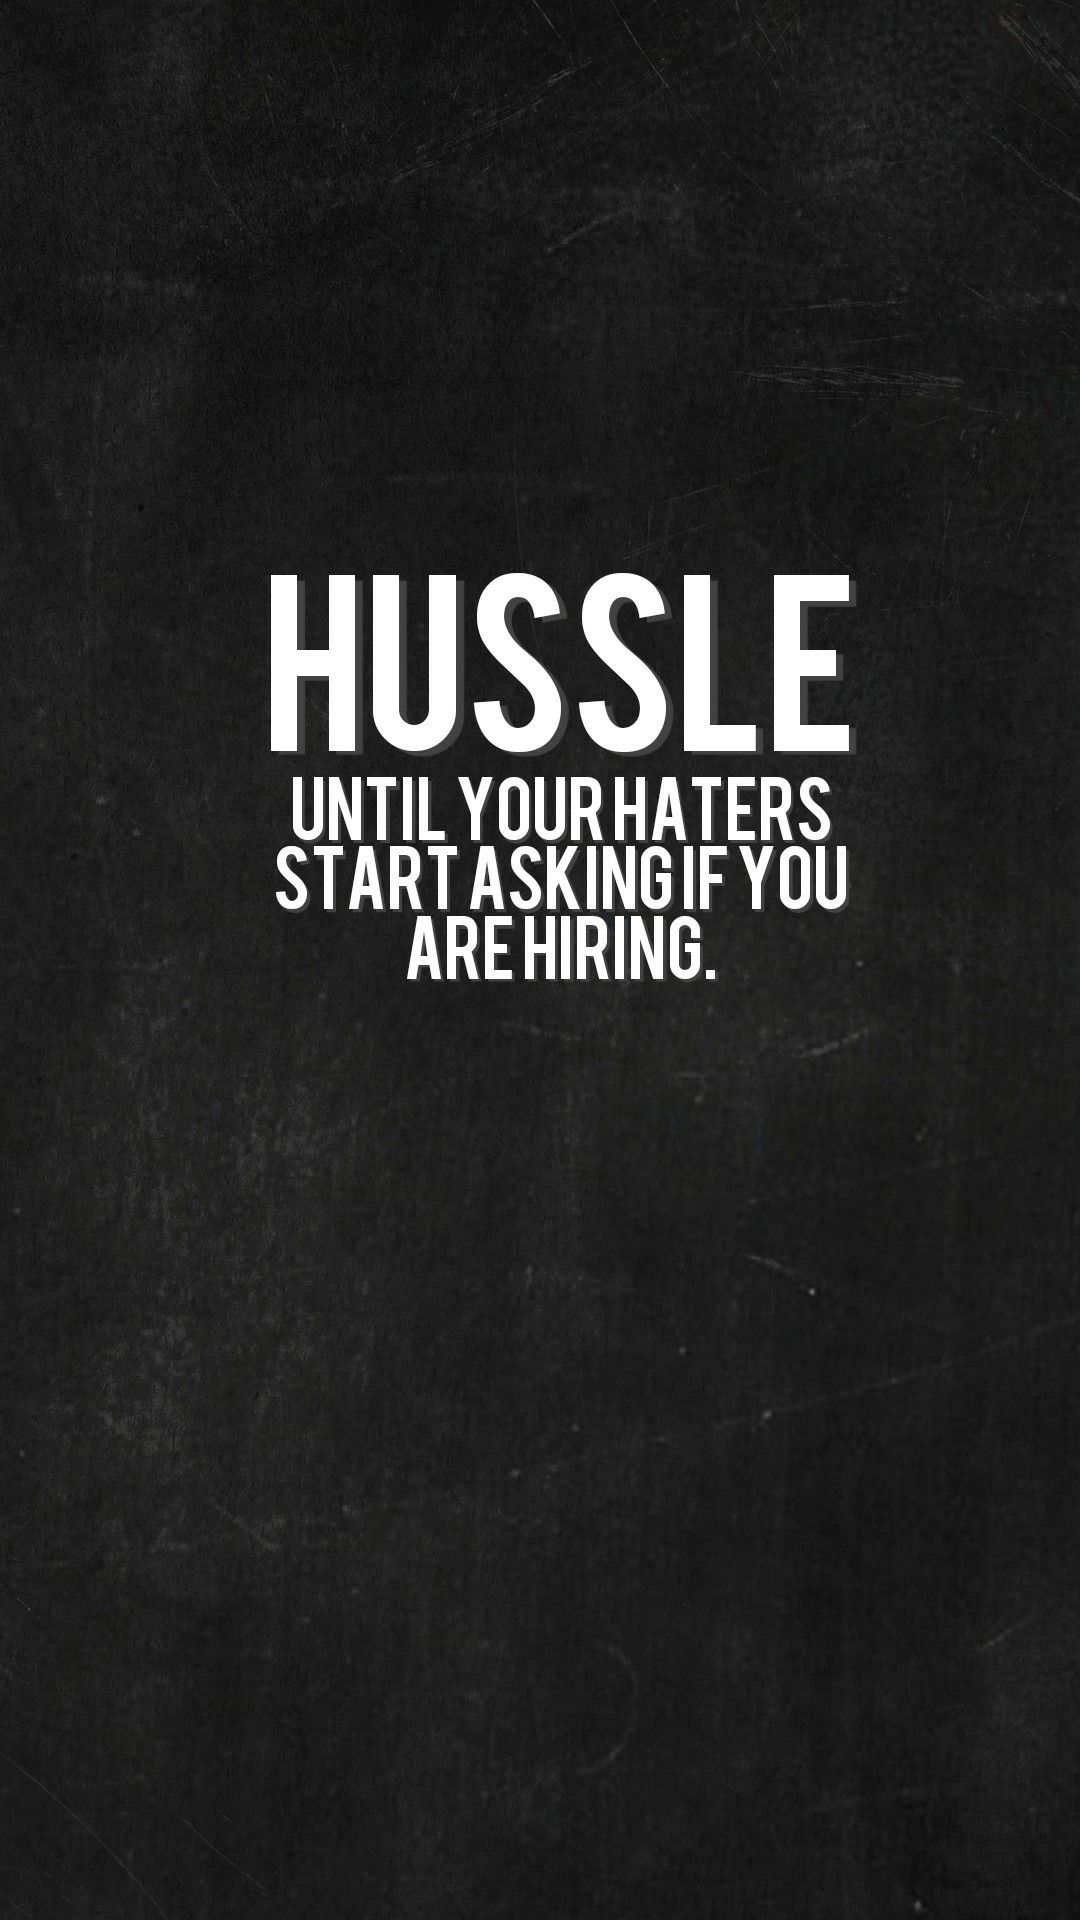 hustle #work #wallpaper #improve. Quotes to live by, Motivational quotes, Inspirational quotes